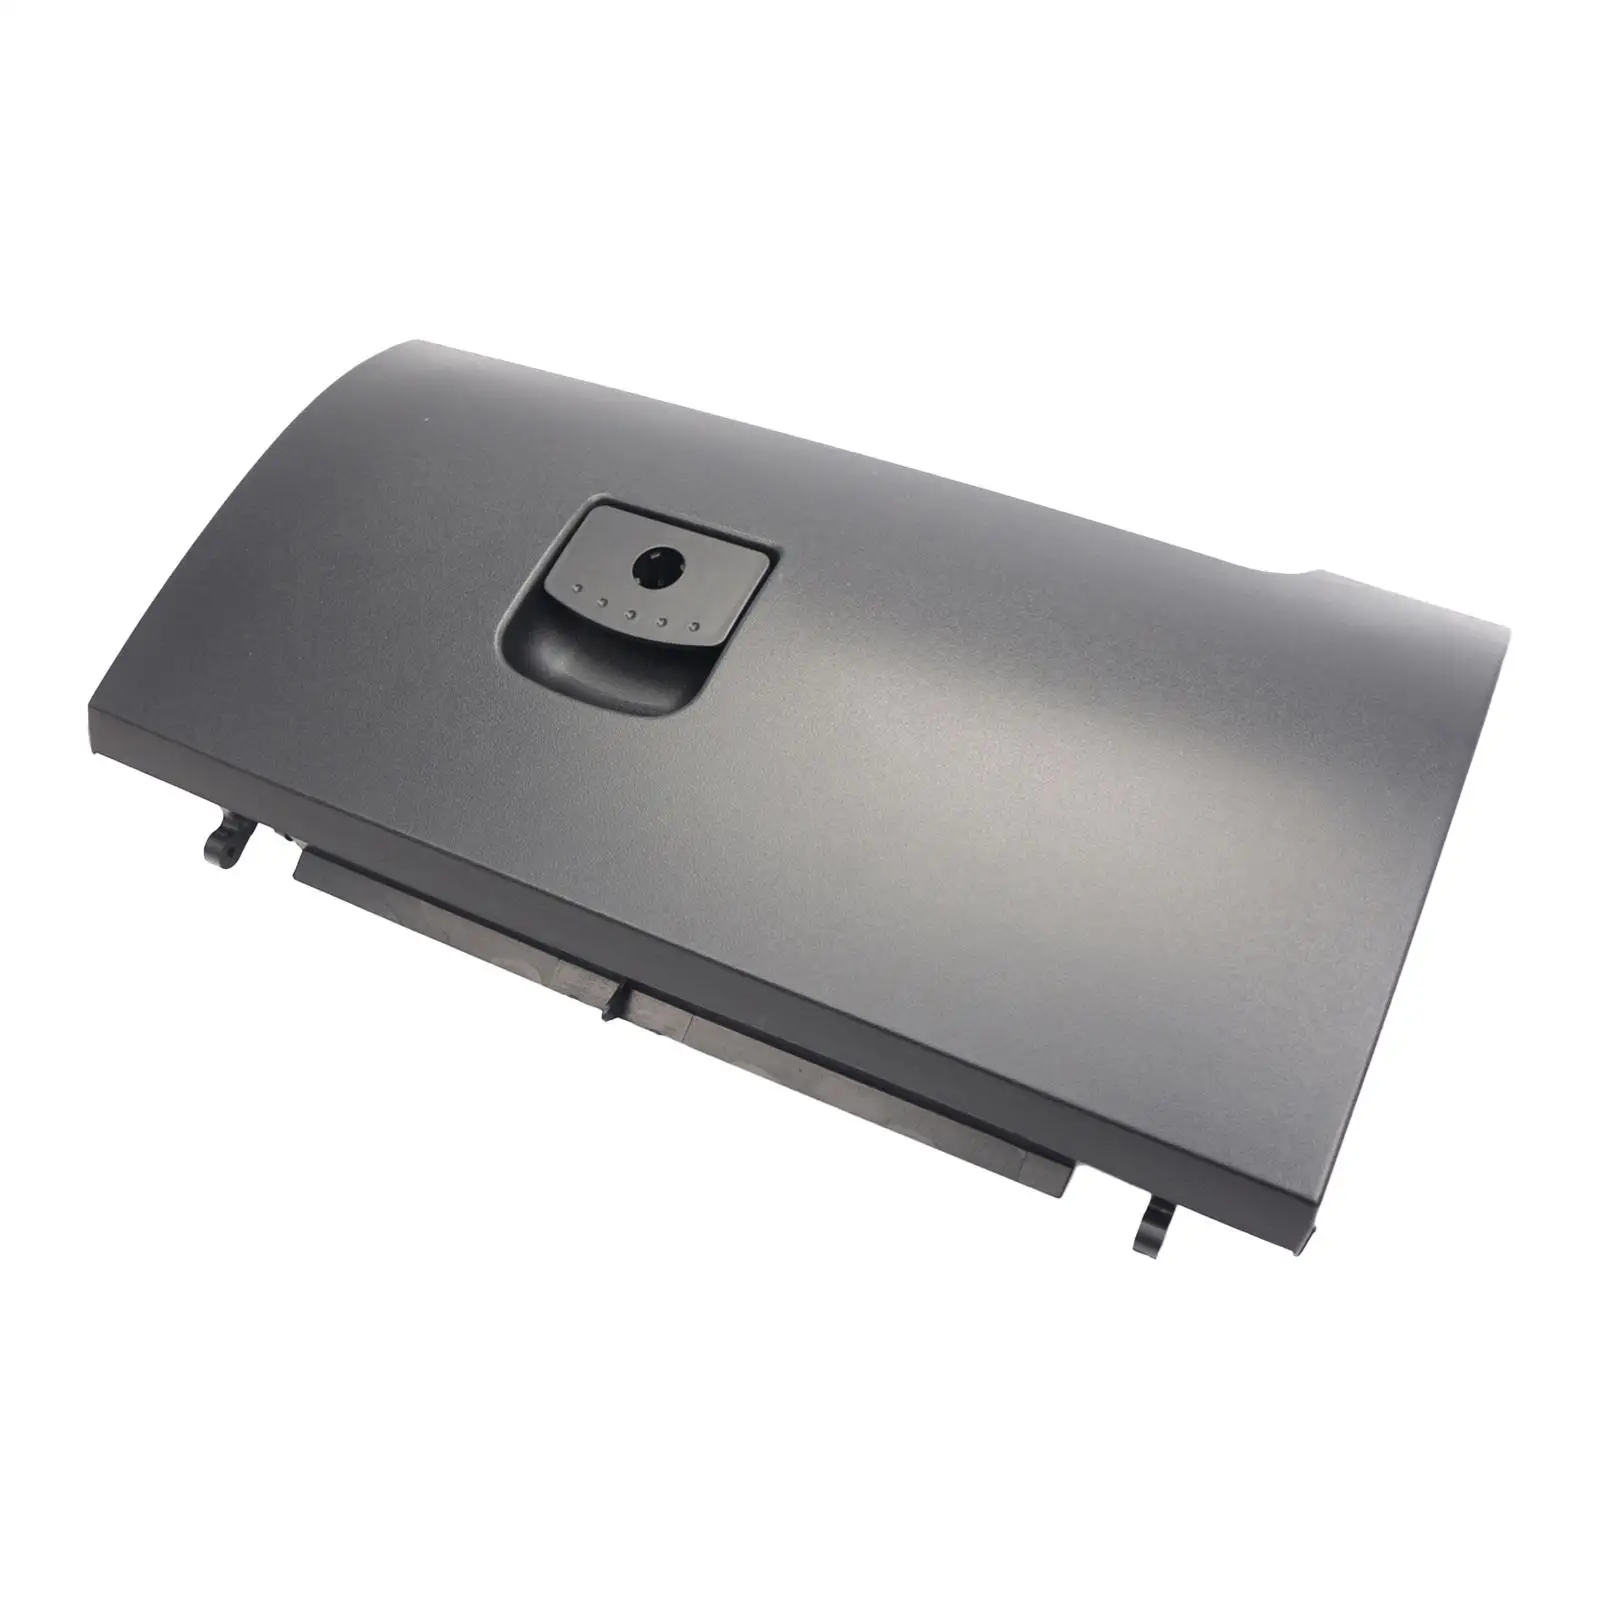 Glove Box Door Lid Assembly 1C1880300G Black Easy Installation Replace High Performance for Volkswagen Beetle Accessories